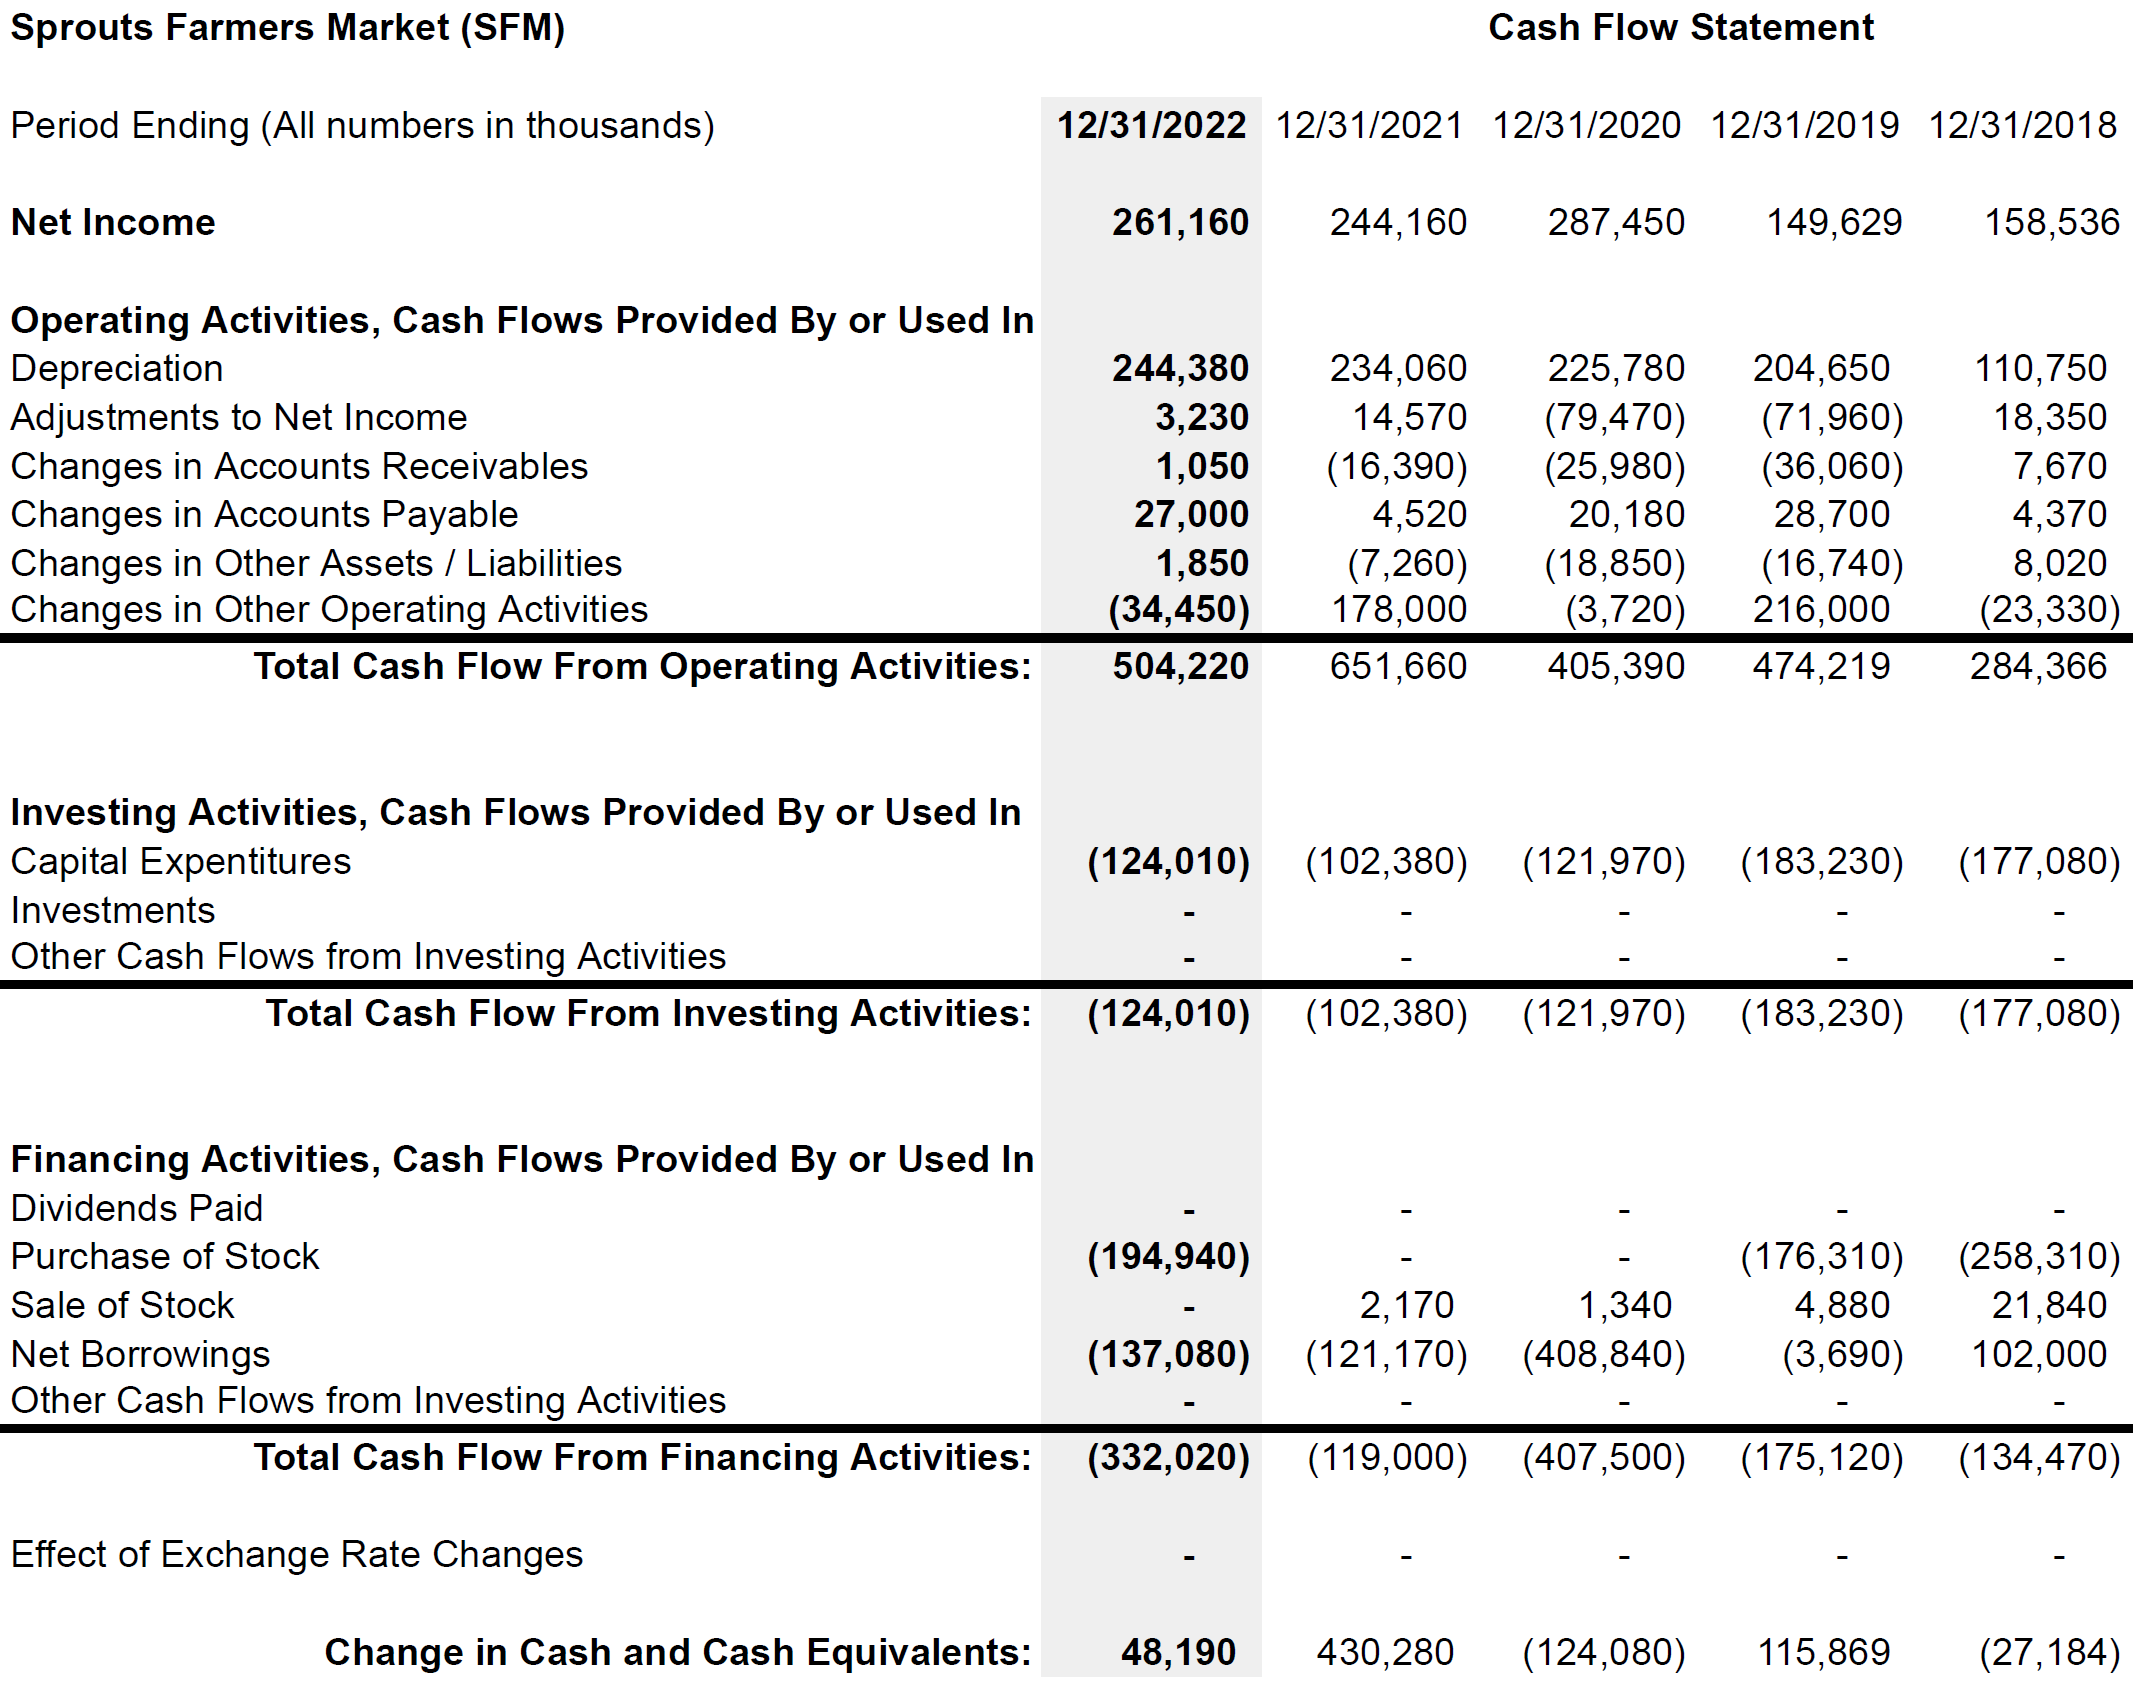 Sprouts Cash Flow Statement as of December 31, 2022